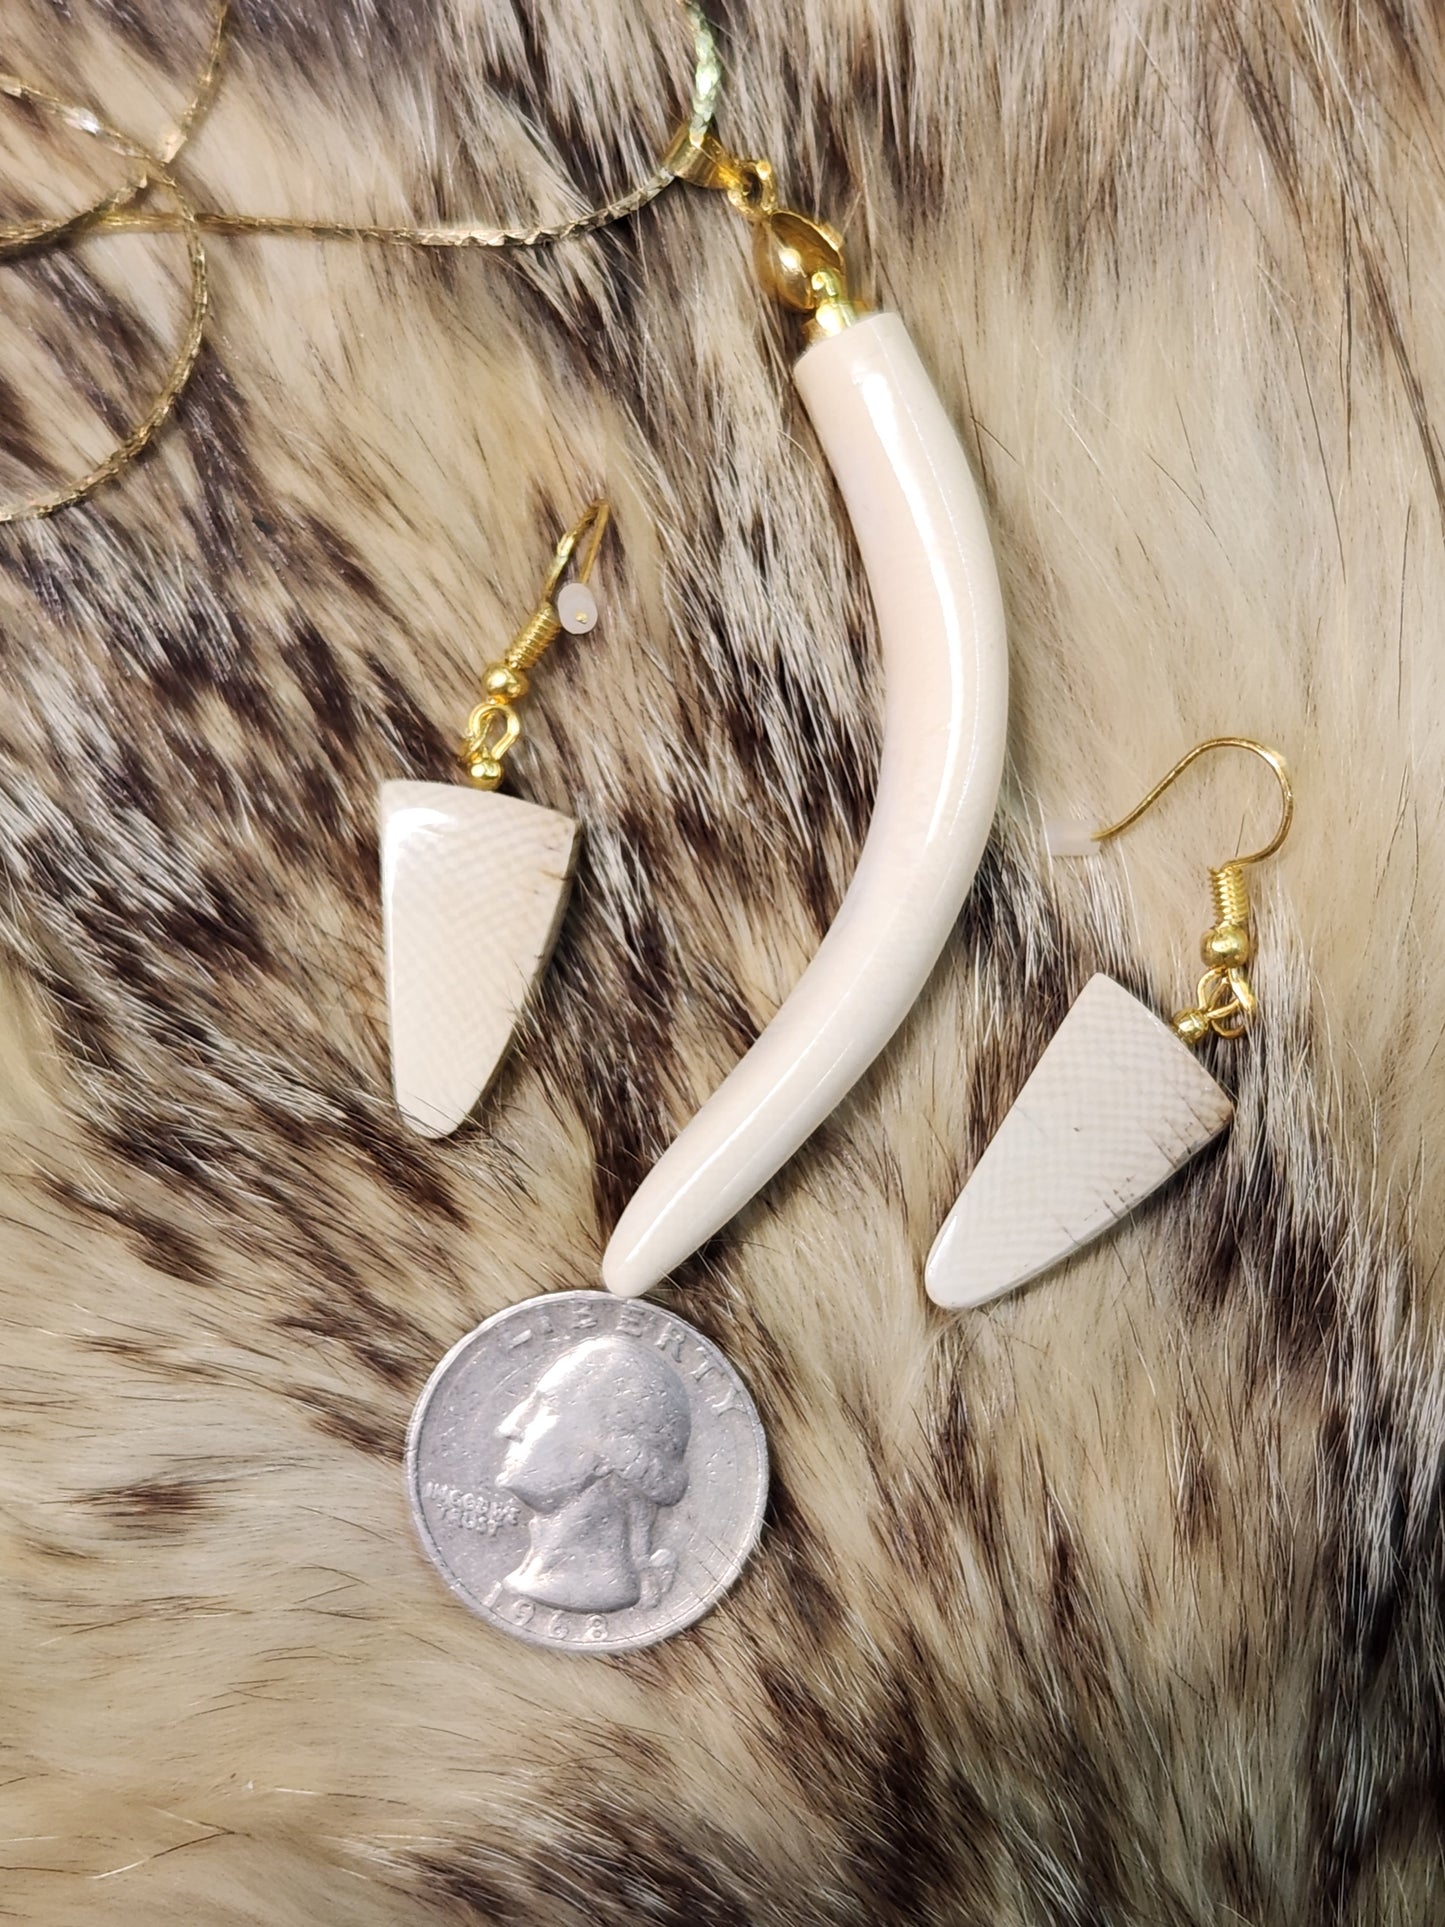 Mammoth ivory earrings and neckless